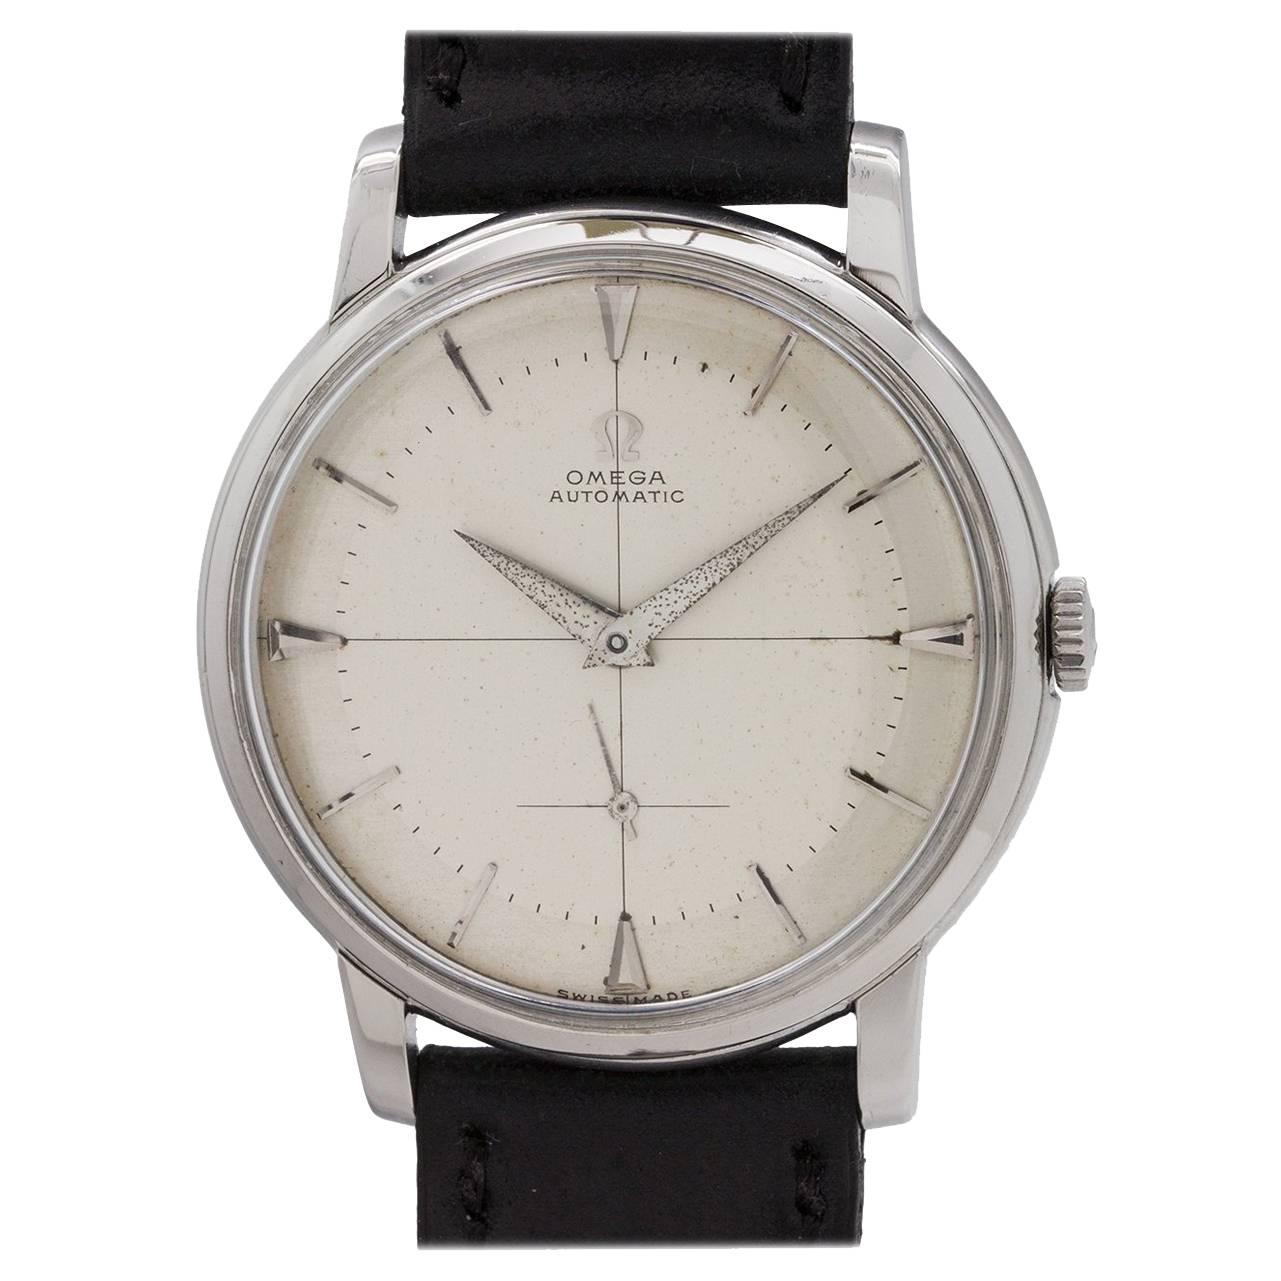 Omega Stainless Steel Automatic Wristwatch Ref. 2864, circa 1956